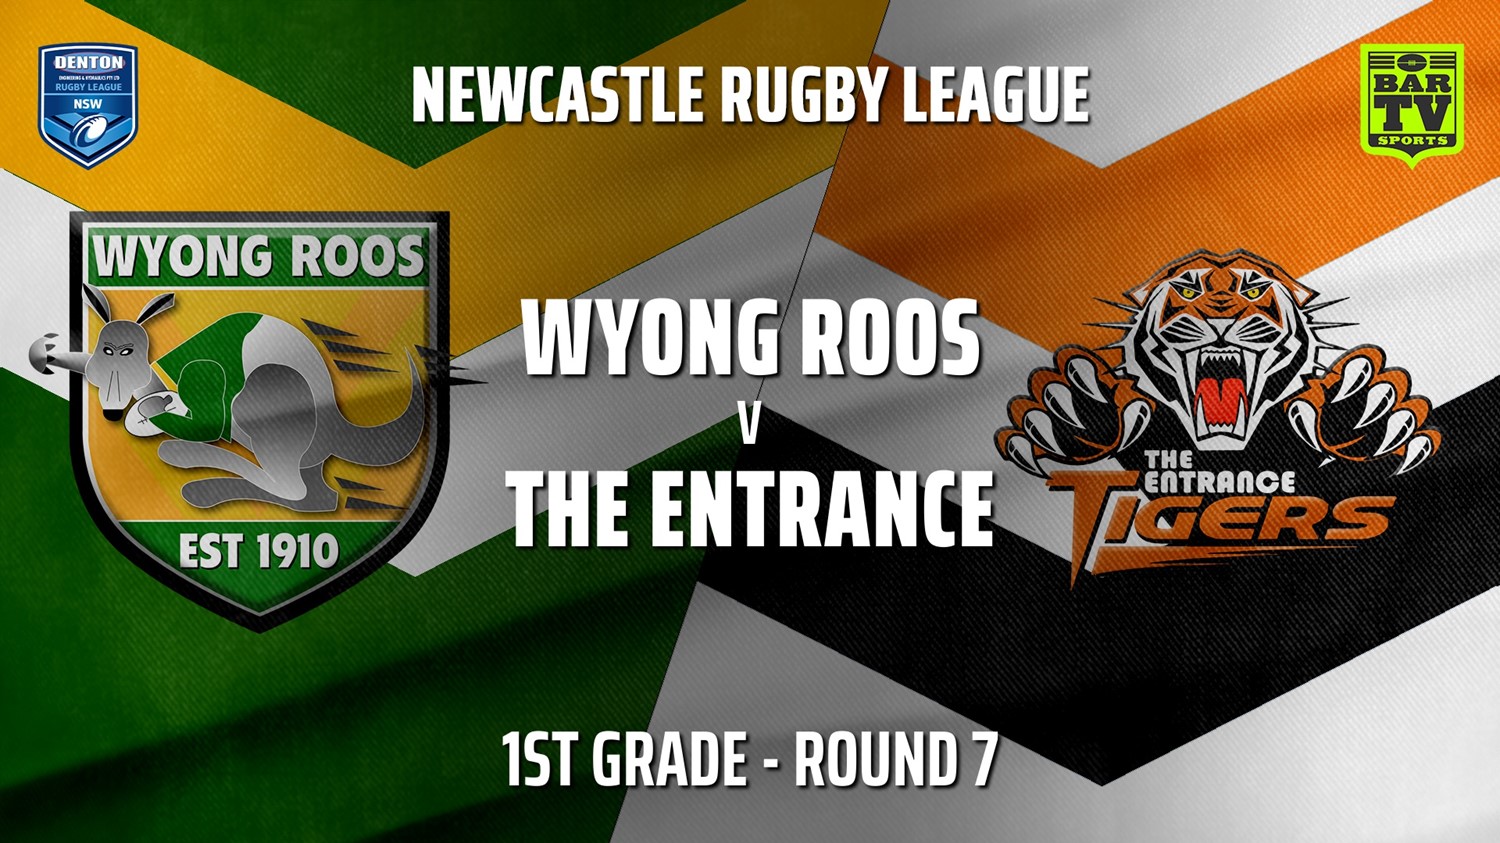 210508-Newcastle Rugby League Round 7 - 1st Grade - Wyong Roos v The Entrance Tigers Slate Image